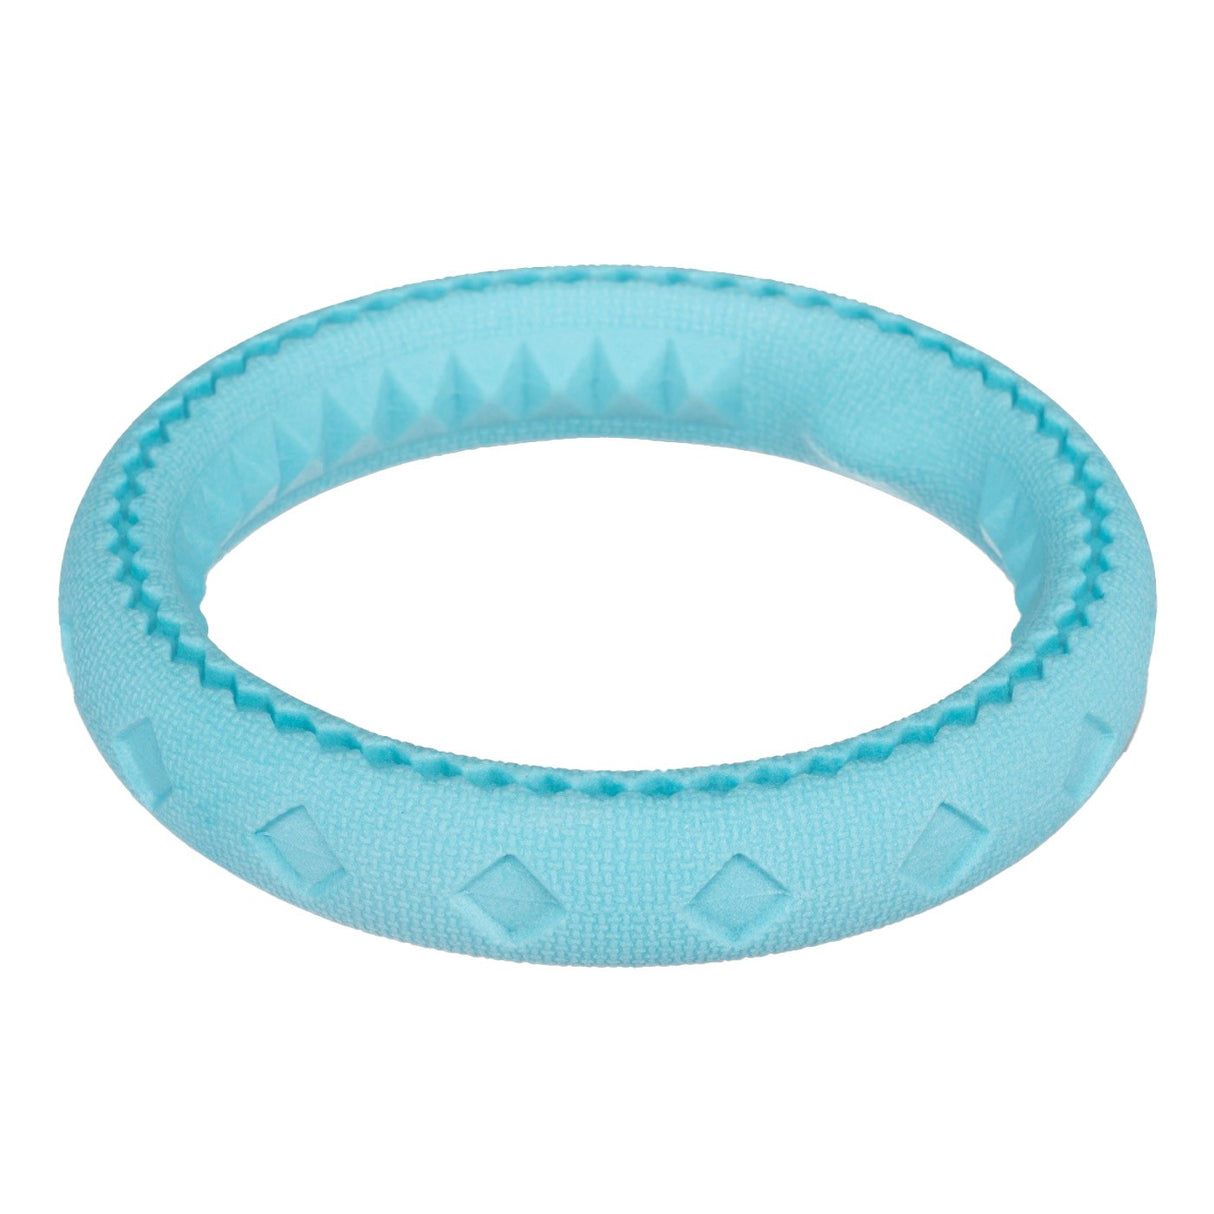 Totally Pooched Chew N' Tug Ring Dog Toy